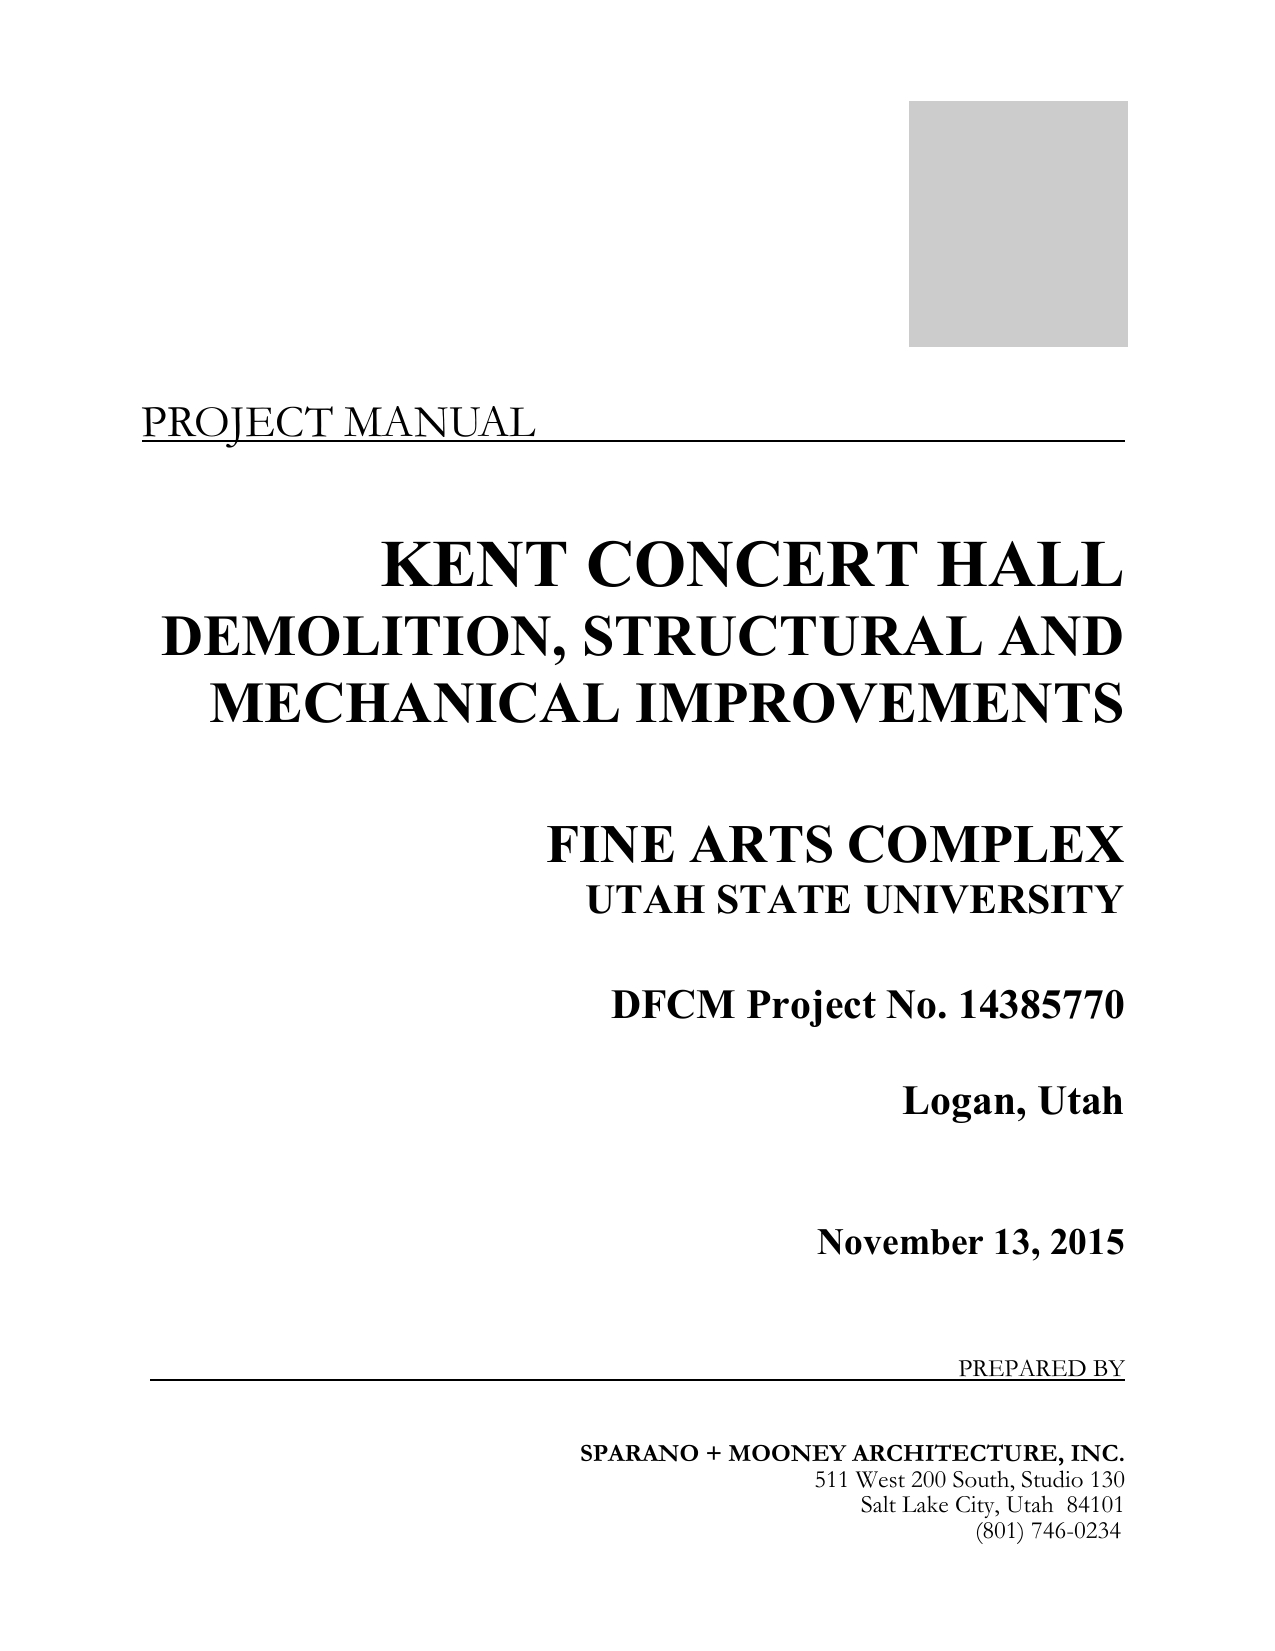 Kent Concert Hall Gramoll Construction Manualzz with regard to dimensions 1275 X 1651